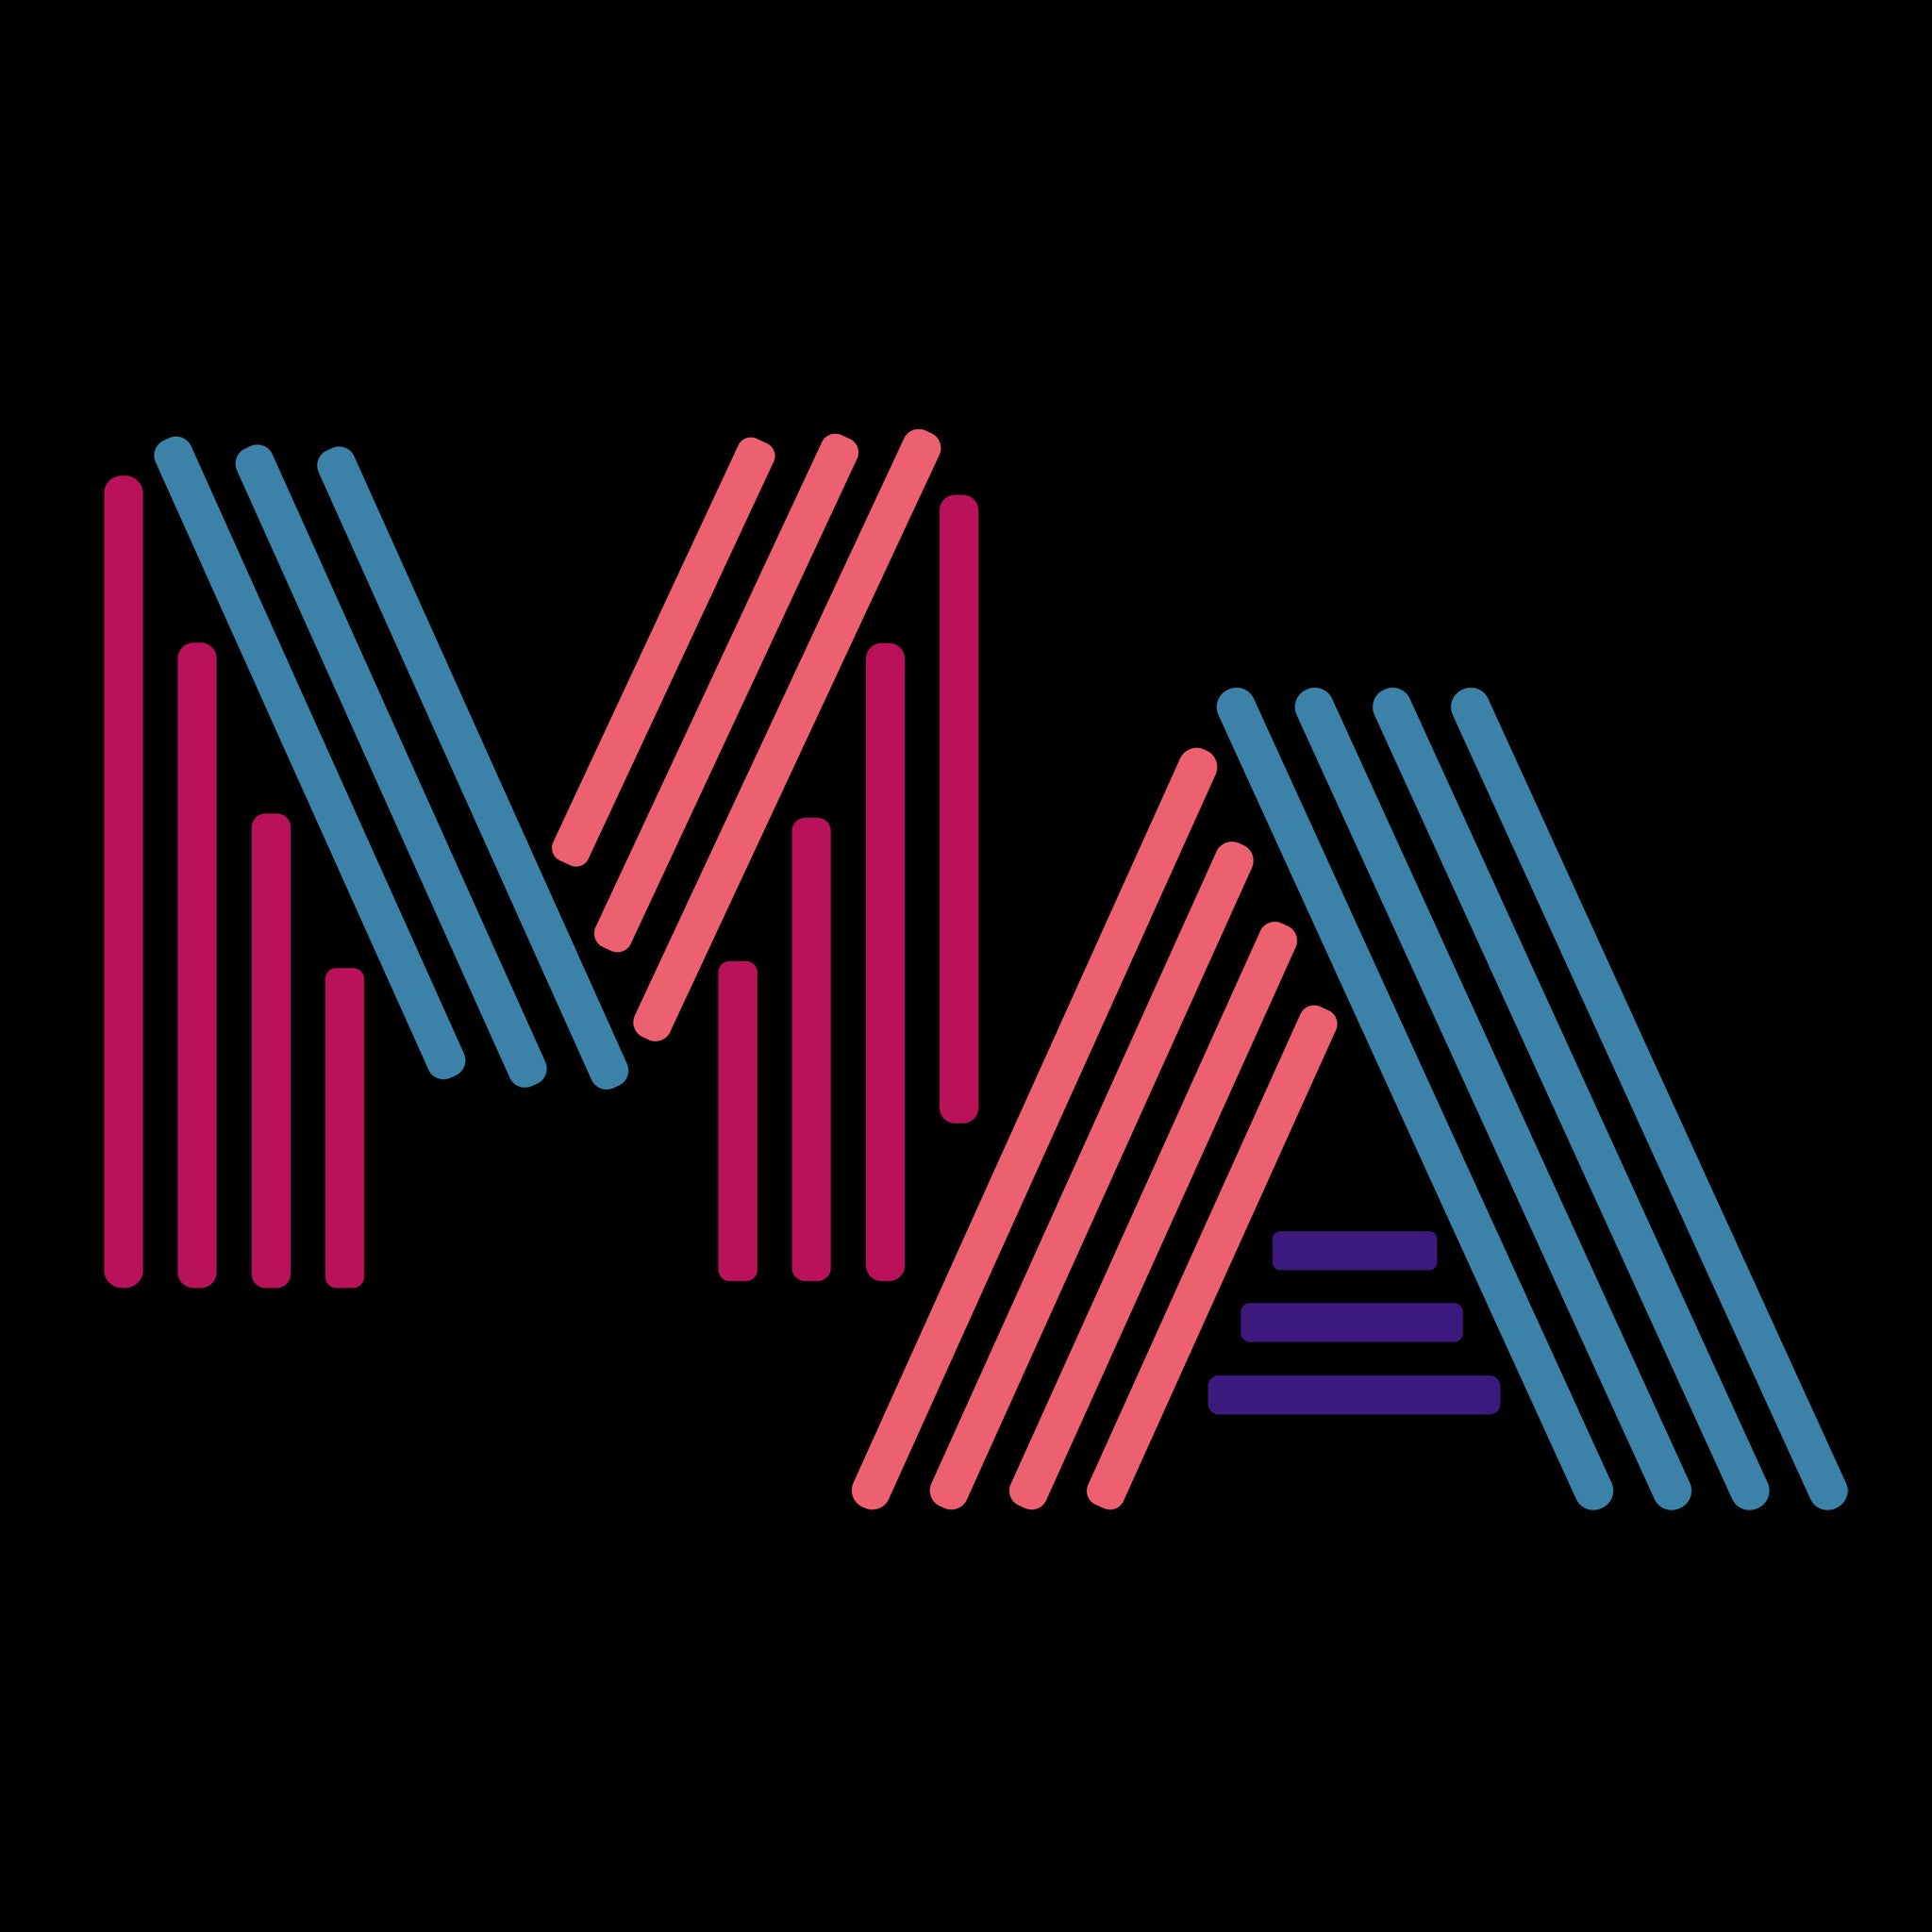 MA massachusetts in neon 90s style lettering on black background